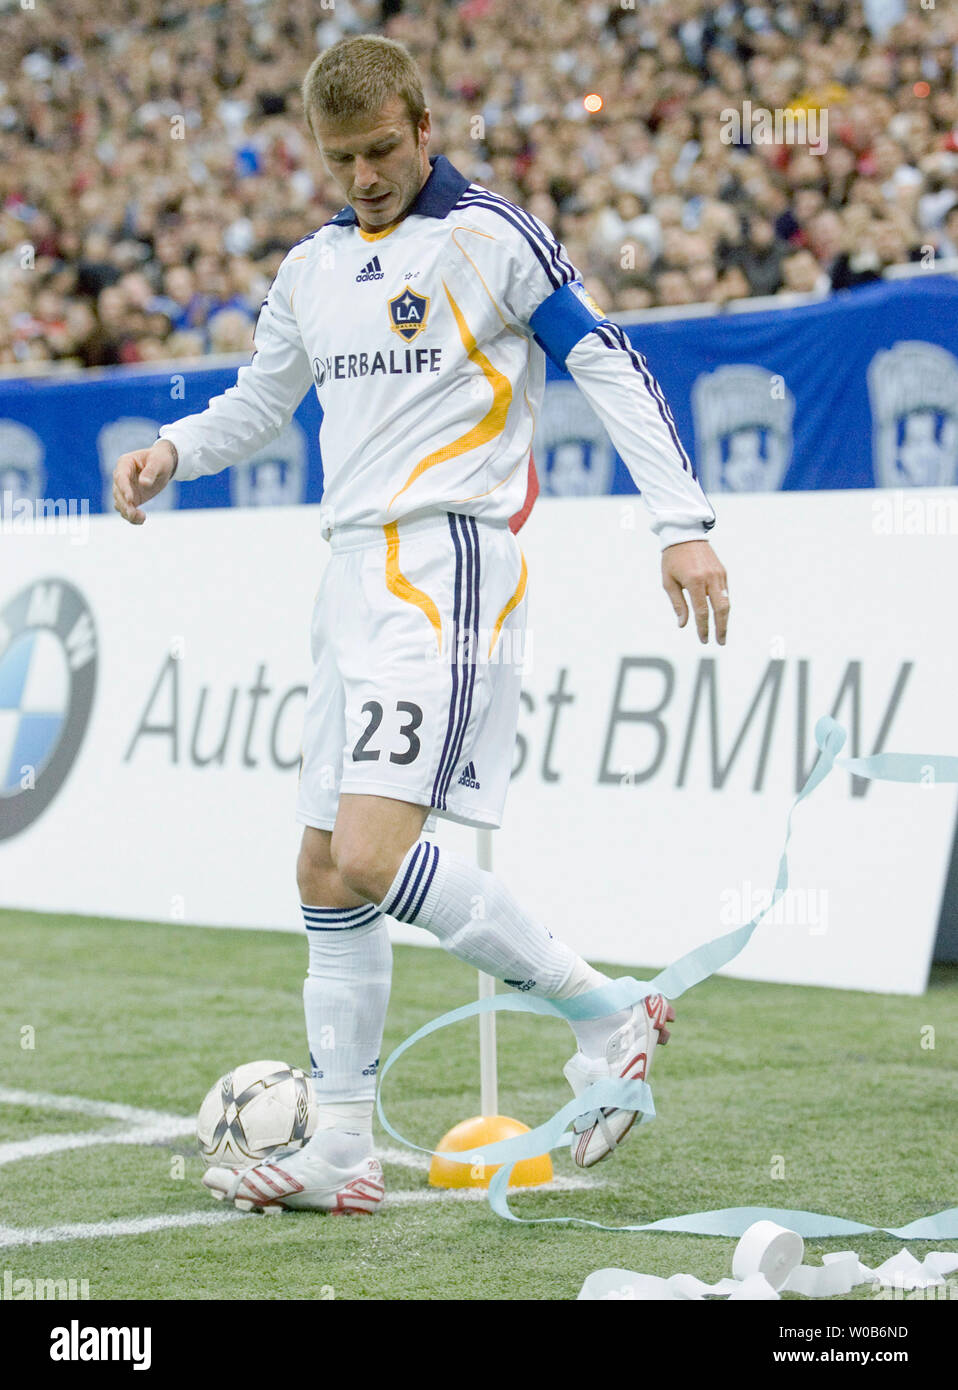 La Galaxy Fans High Resolution Stock Photography and Images - Alamy